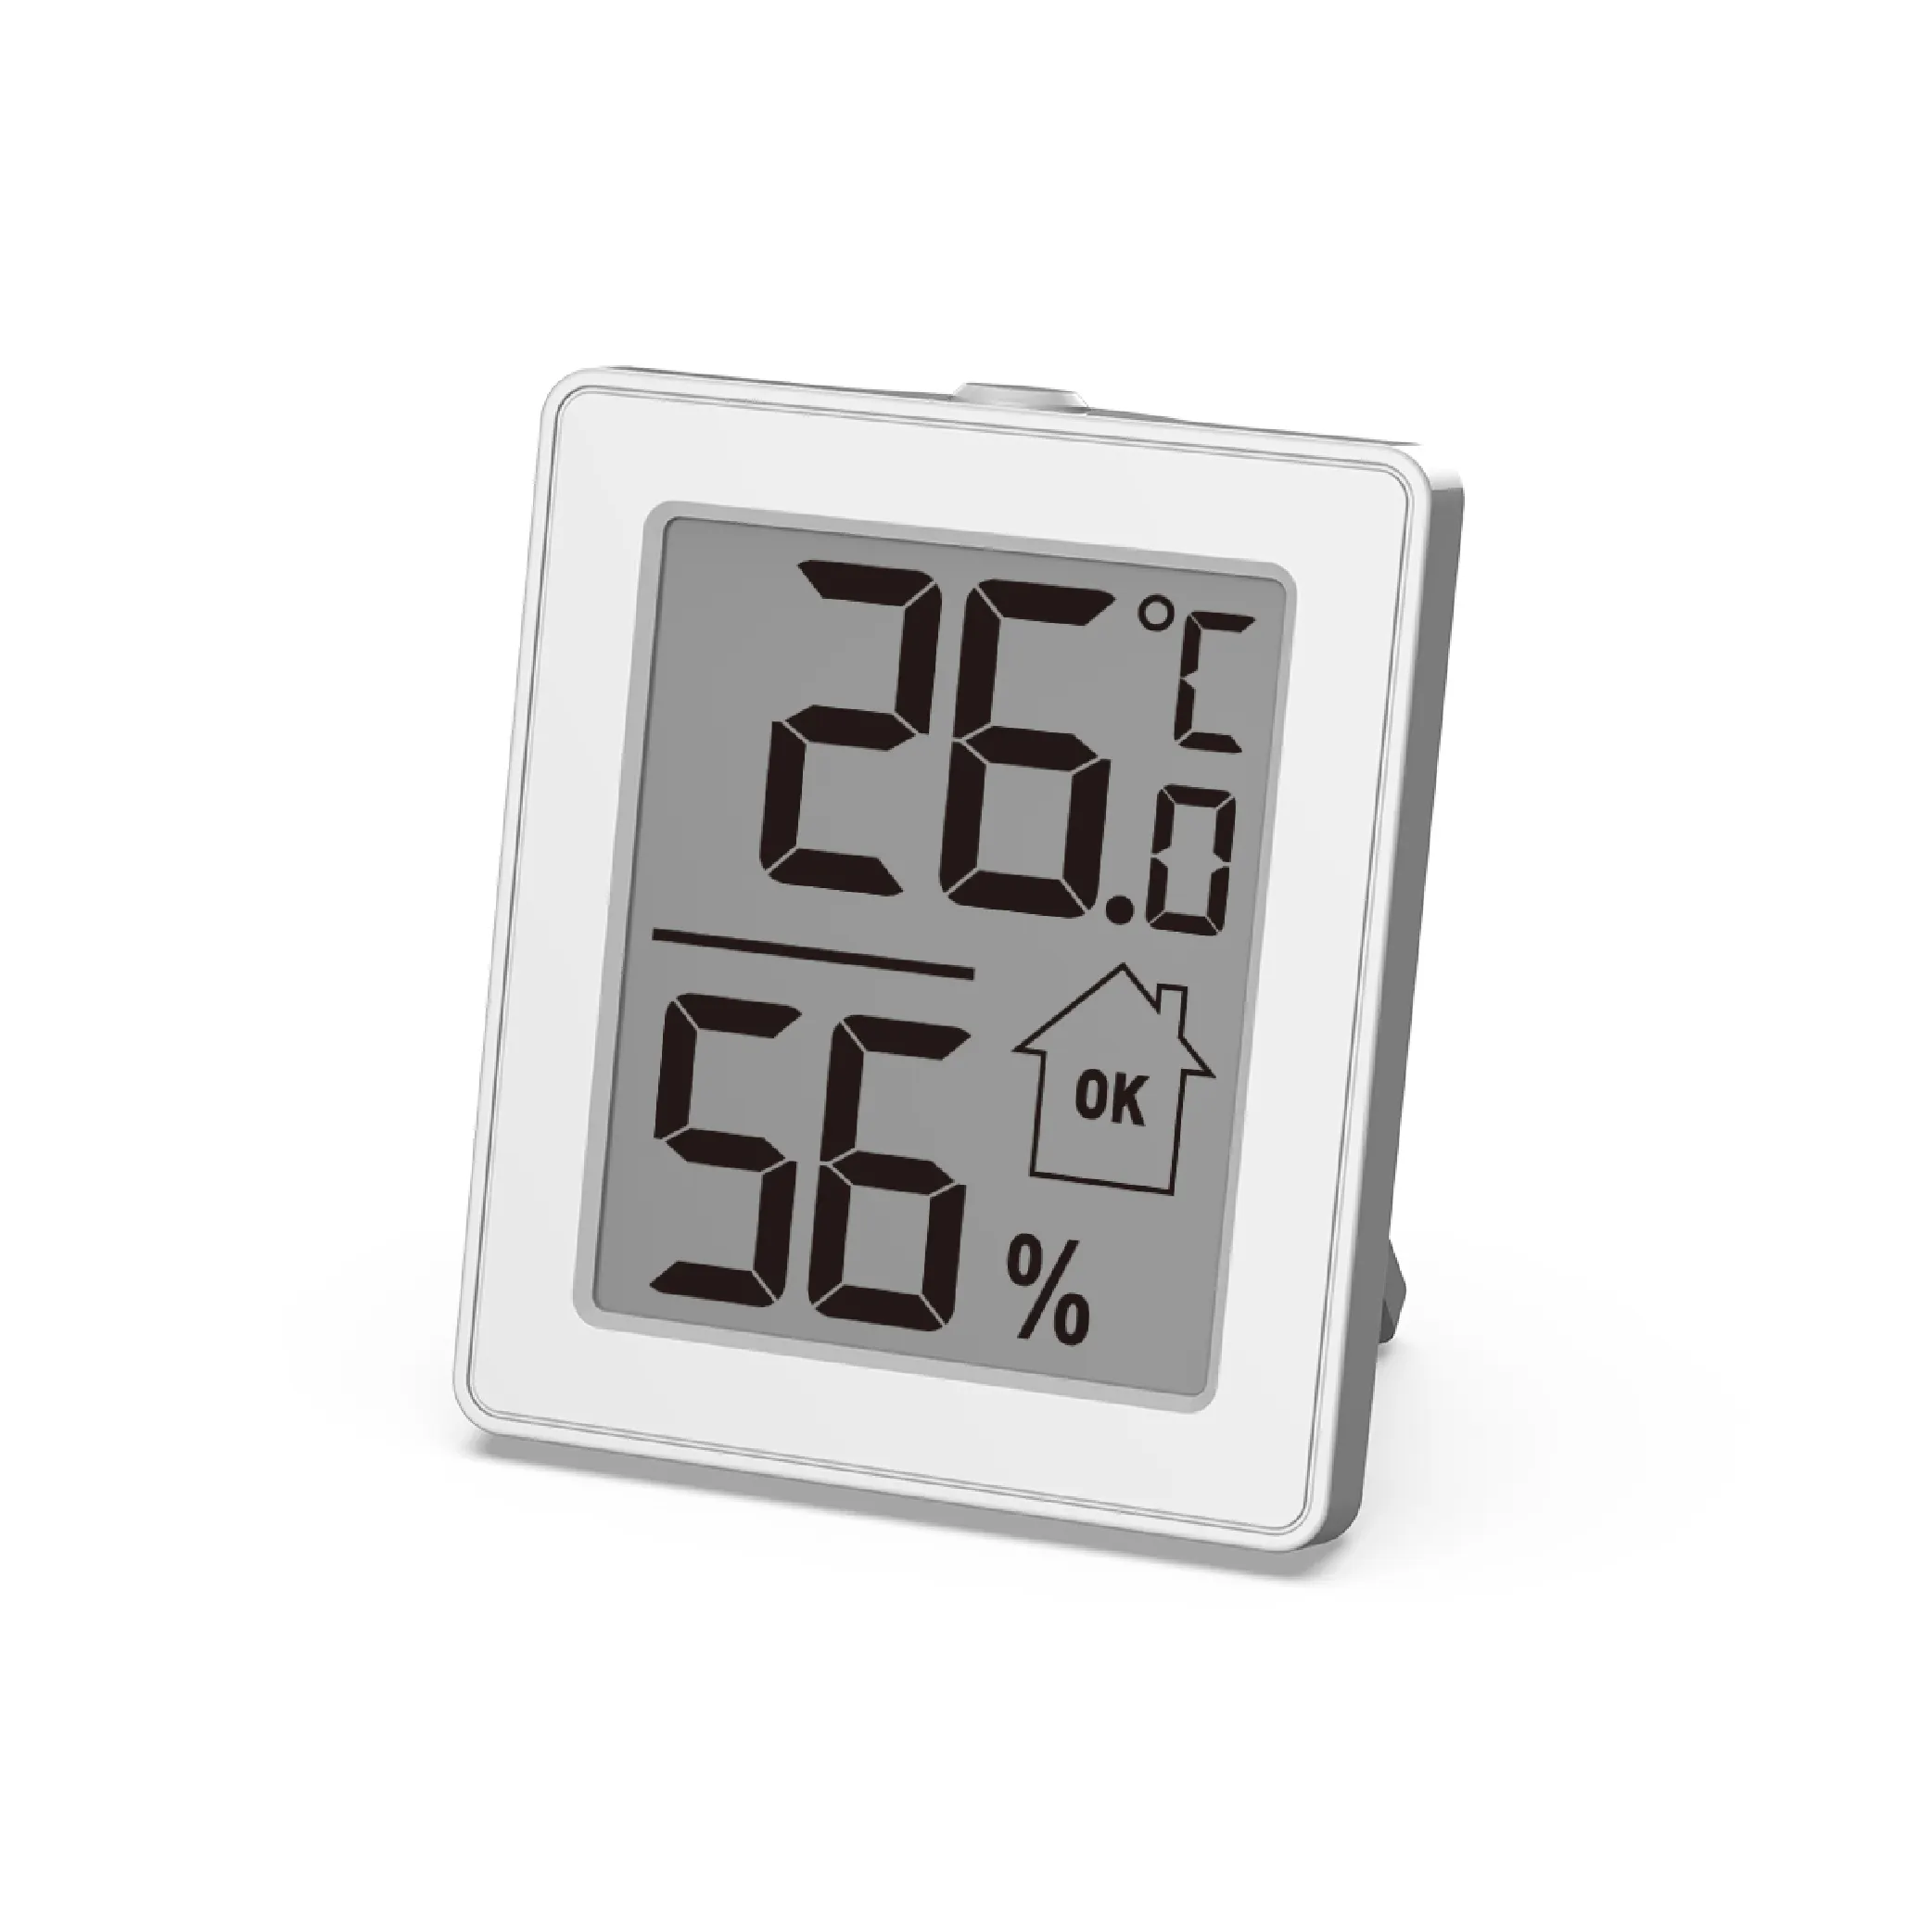 EWETIME 433MHz Digital Weather Station With Barometer Thermometer Hygrometer